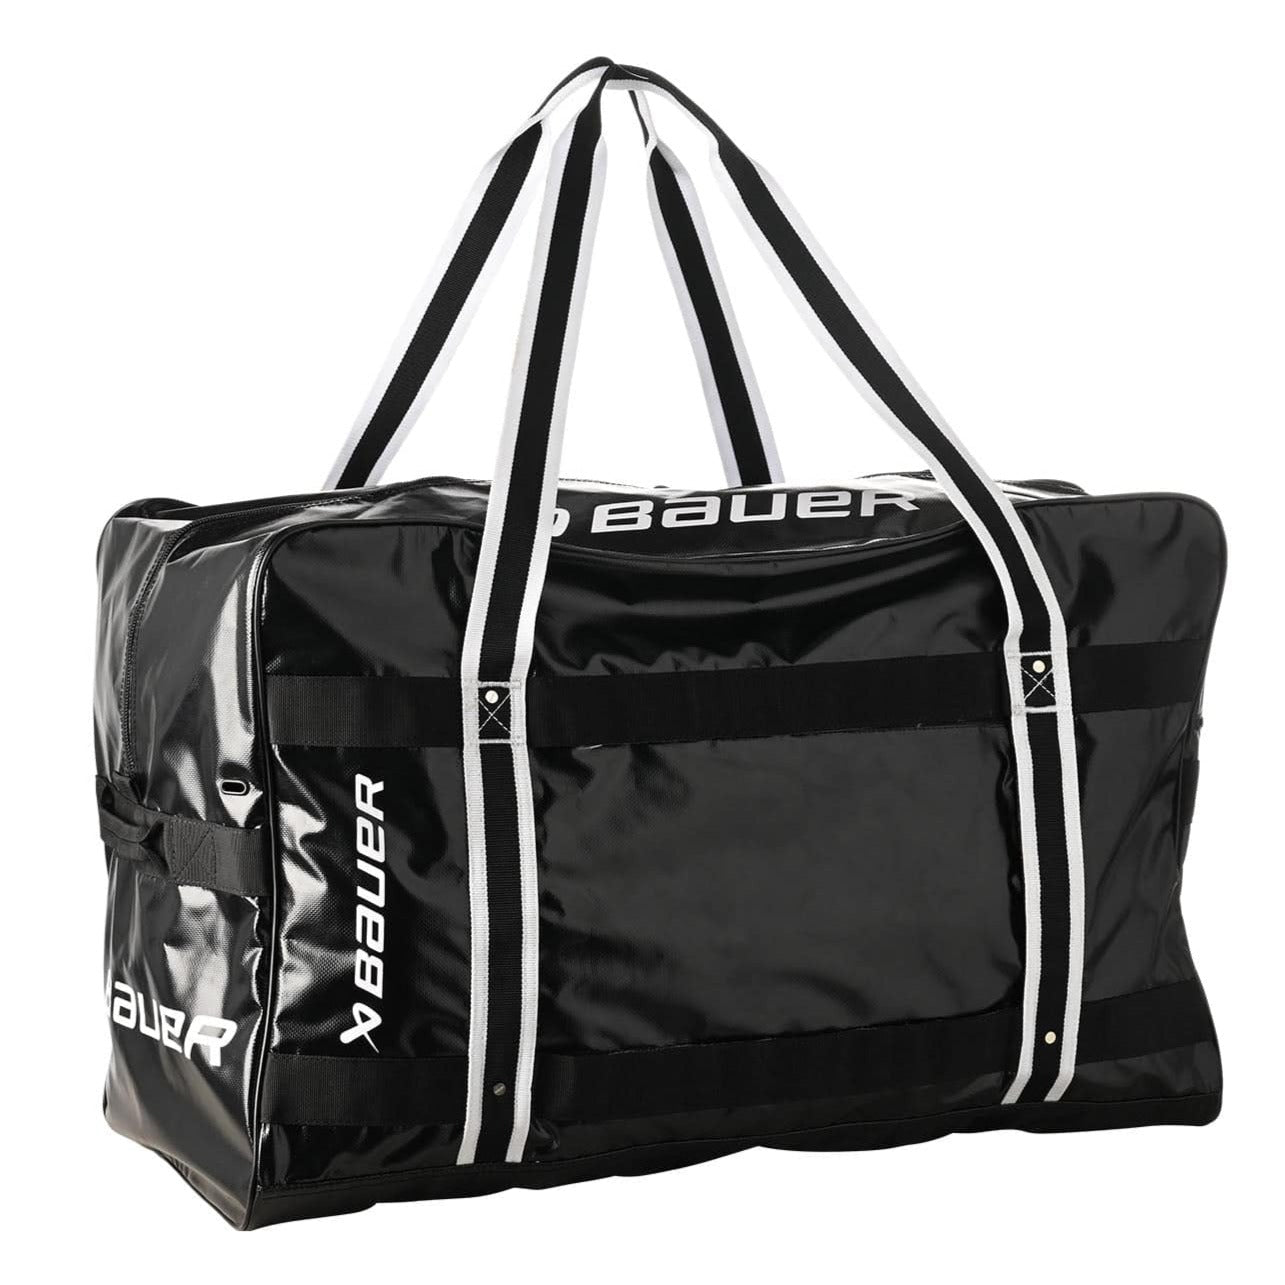 S23 Bauer Pro Senior Goalie Carry Bag - The Hockey Shop Source For Sports